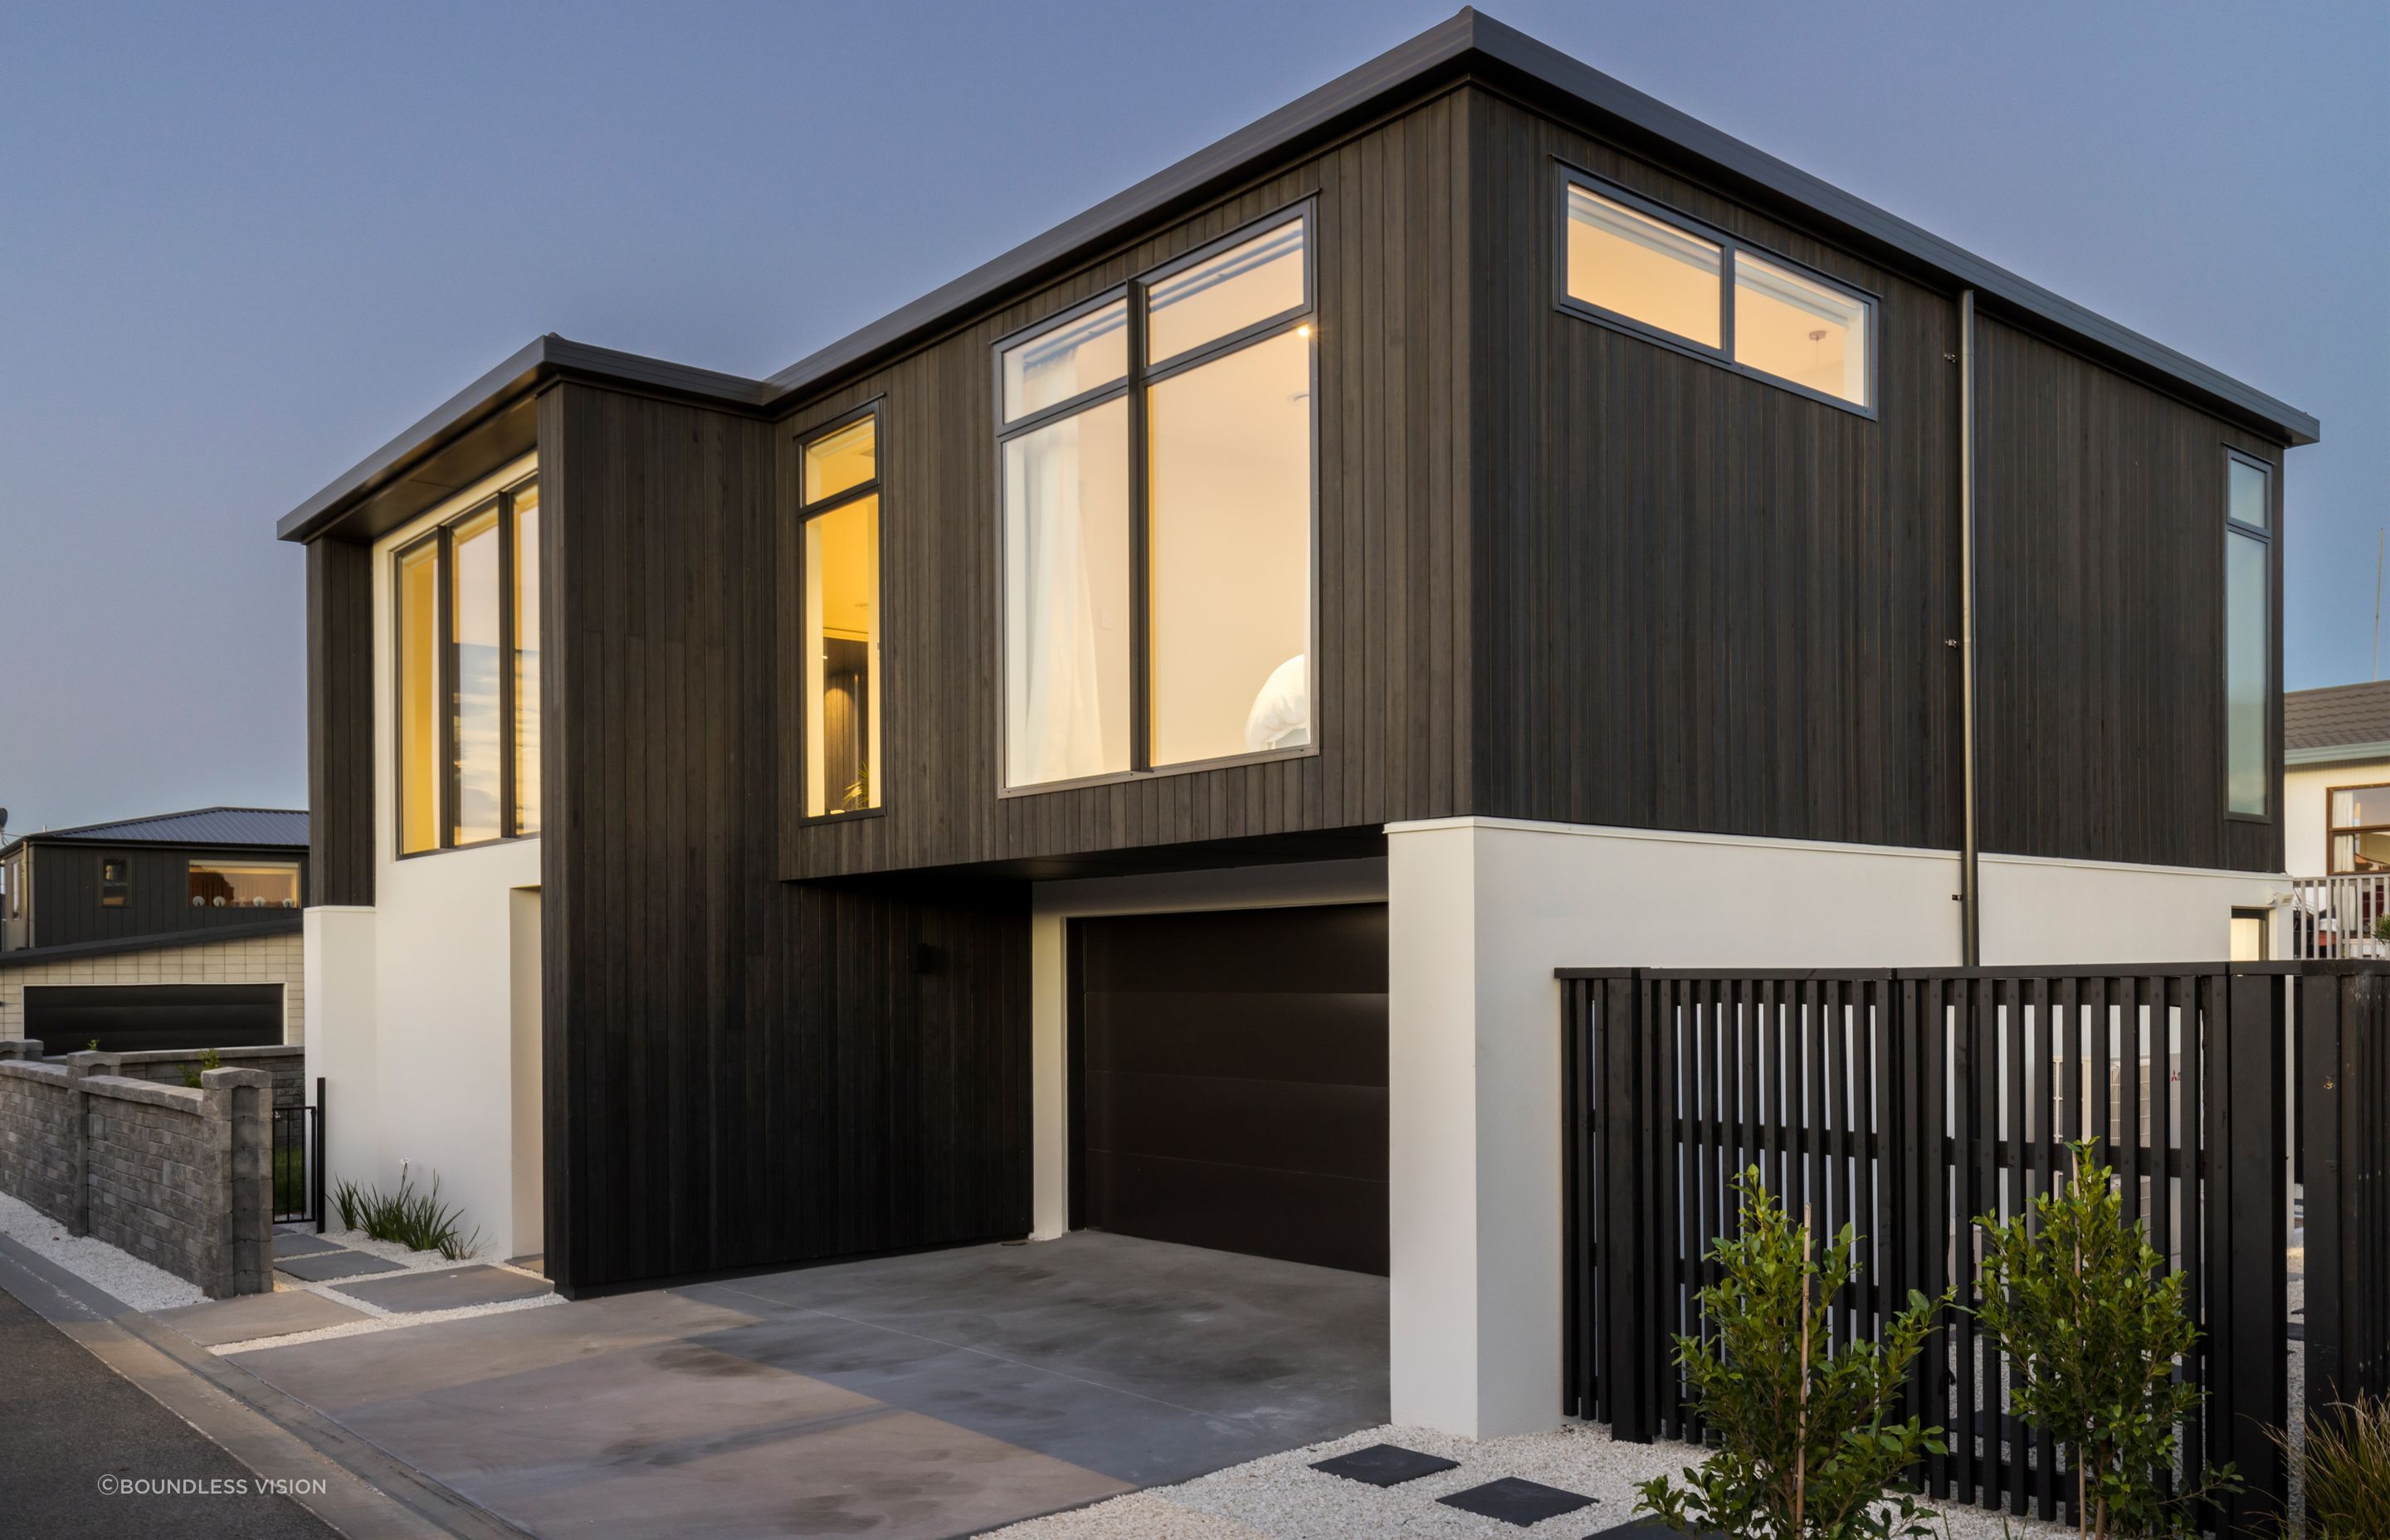 The minimal exterior features only two cladding types.